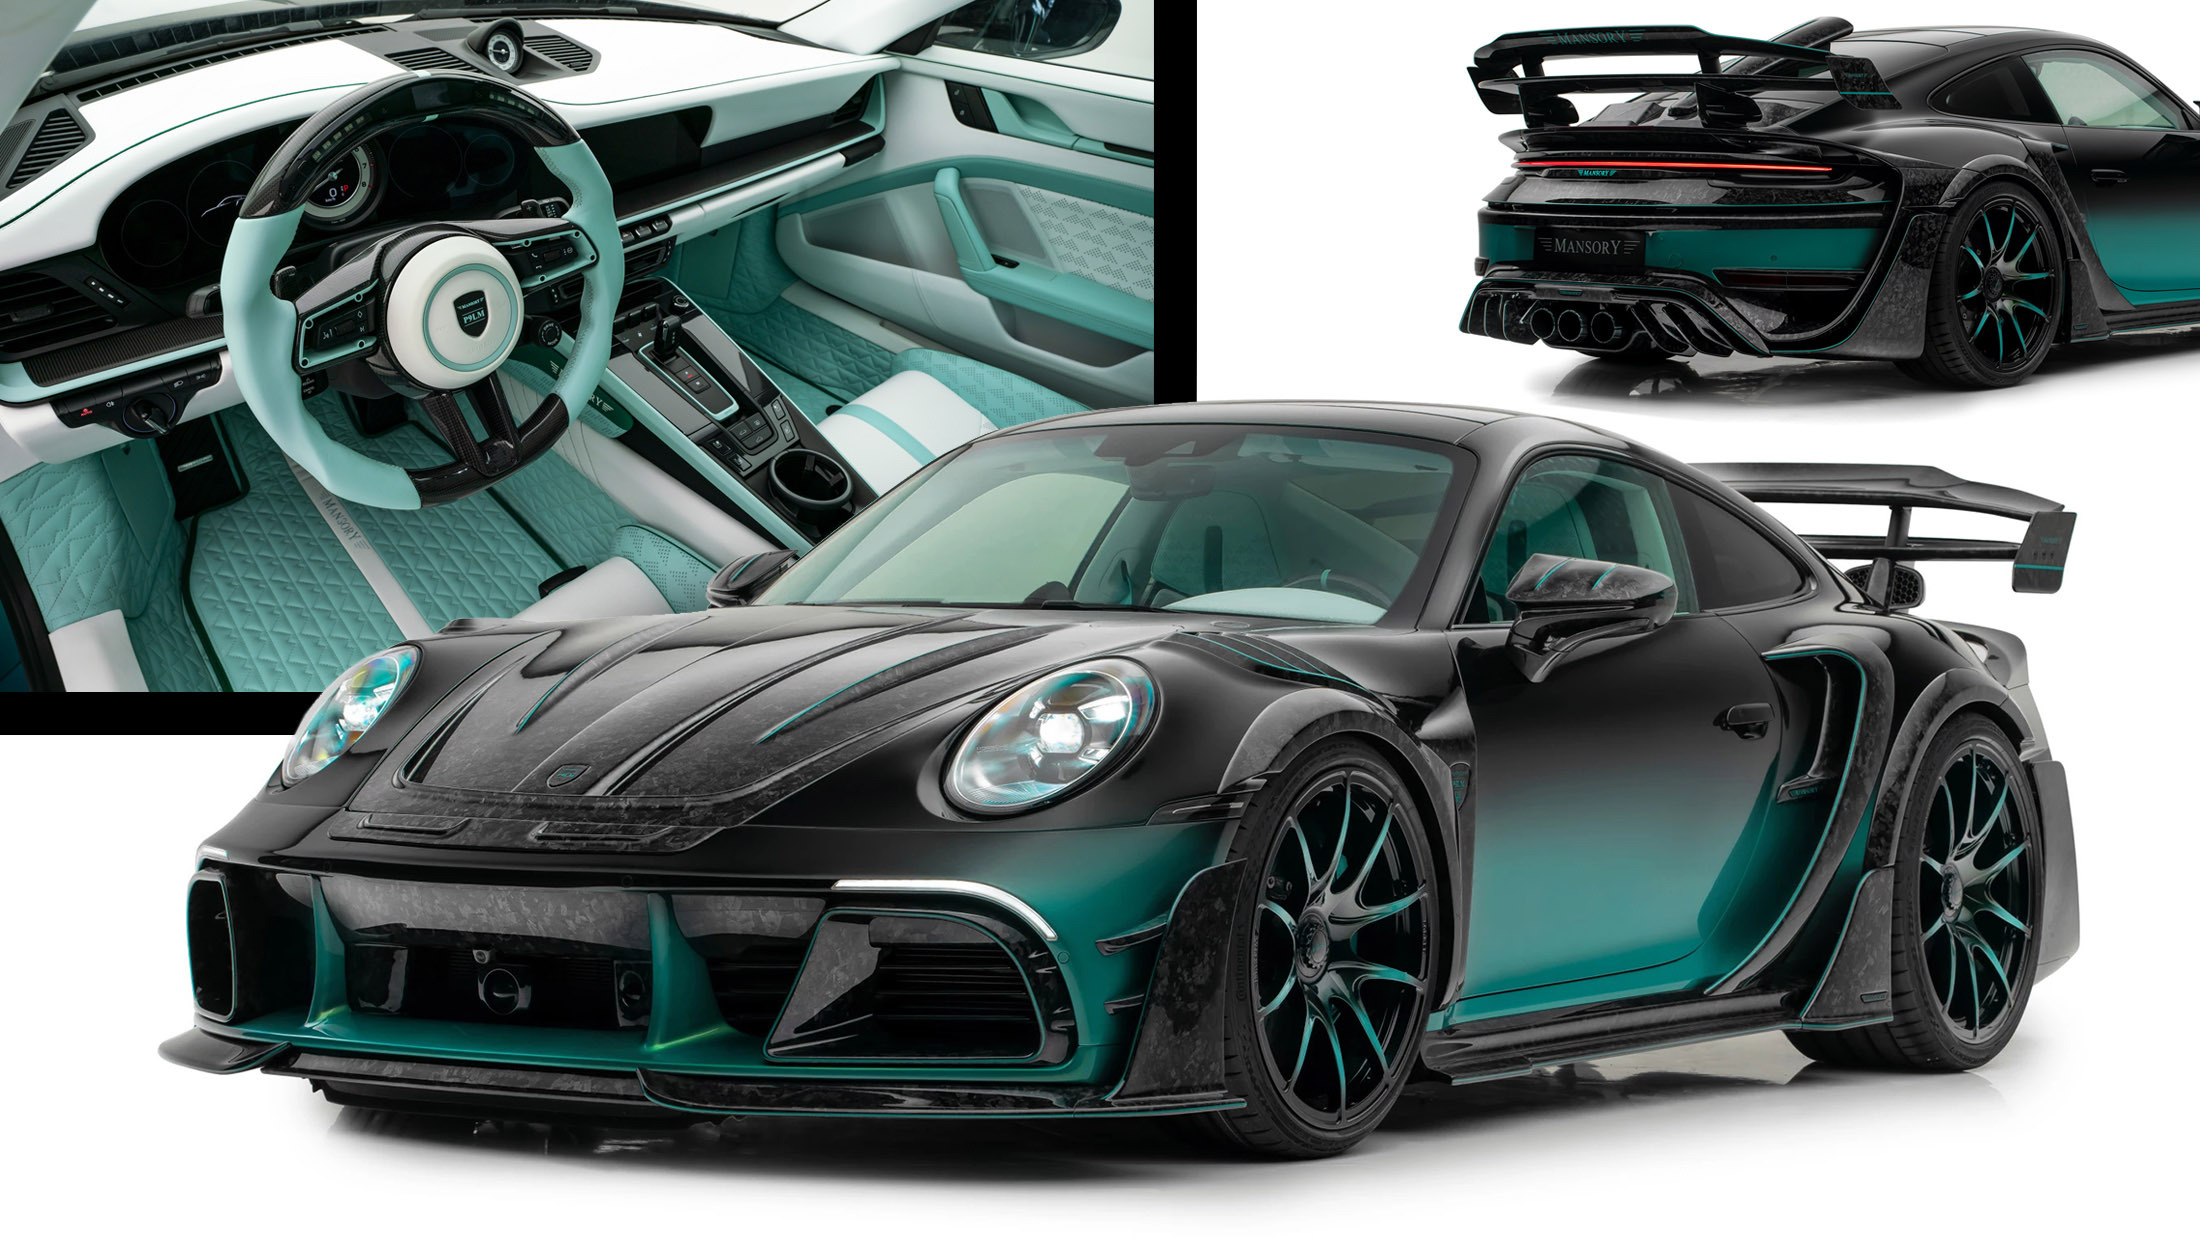 Mansory's Wild Porsche 911 Turbo S Has 900 HP And Forged Carbon